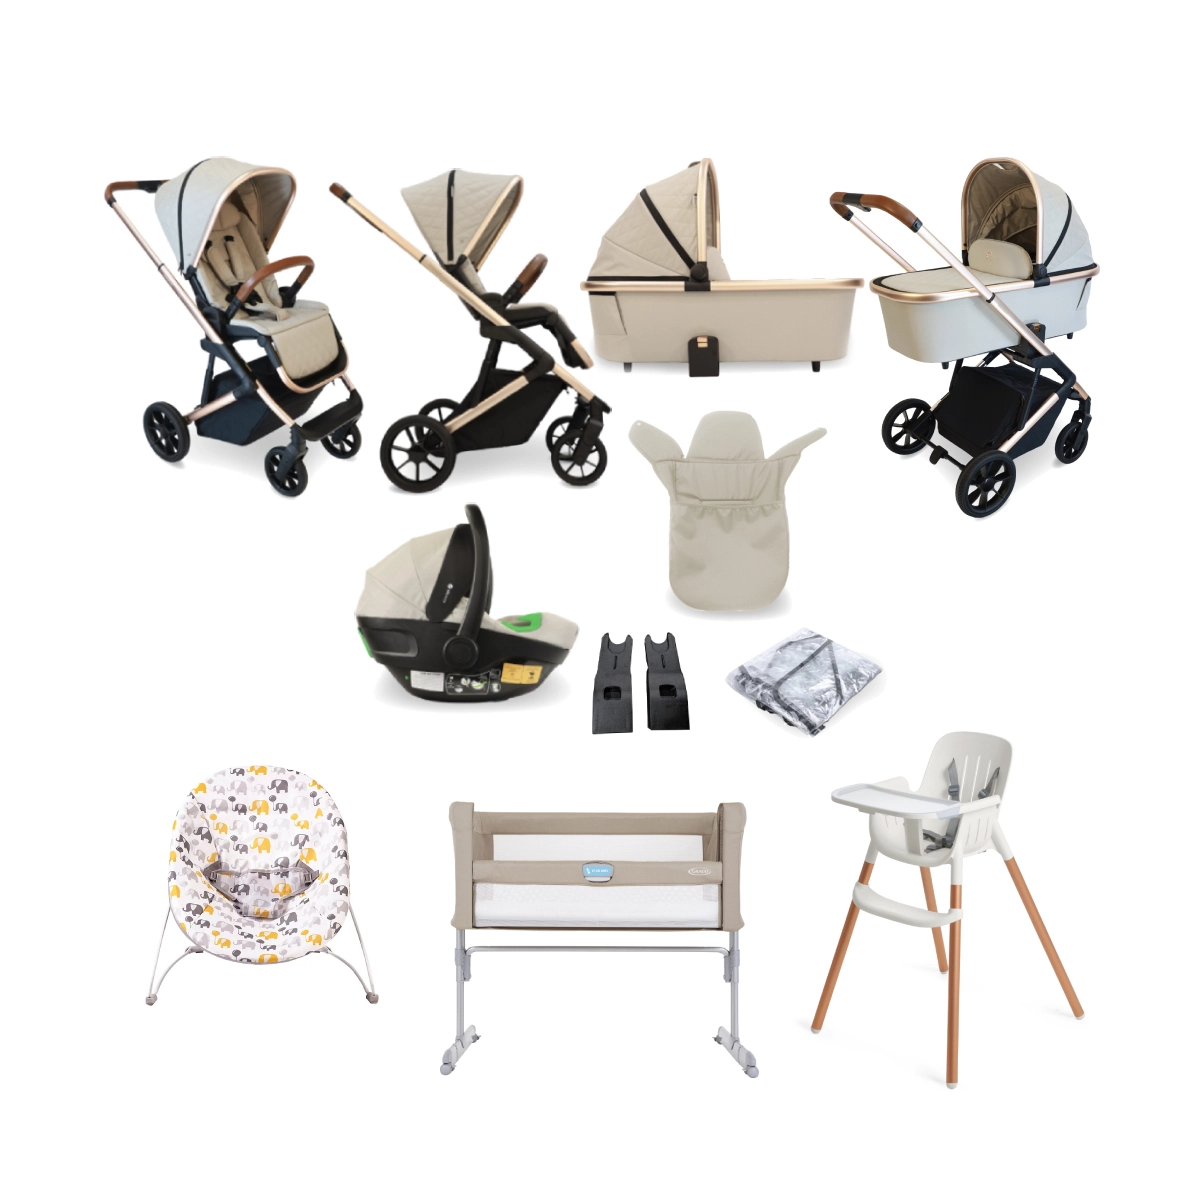 My Babiie MB500i Dani Dyer 11 Piece Everything You Need Travel System Bundle